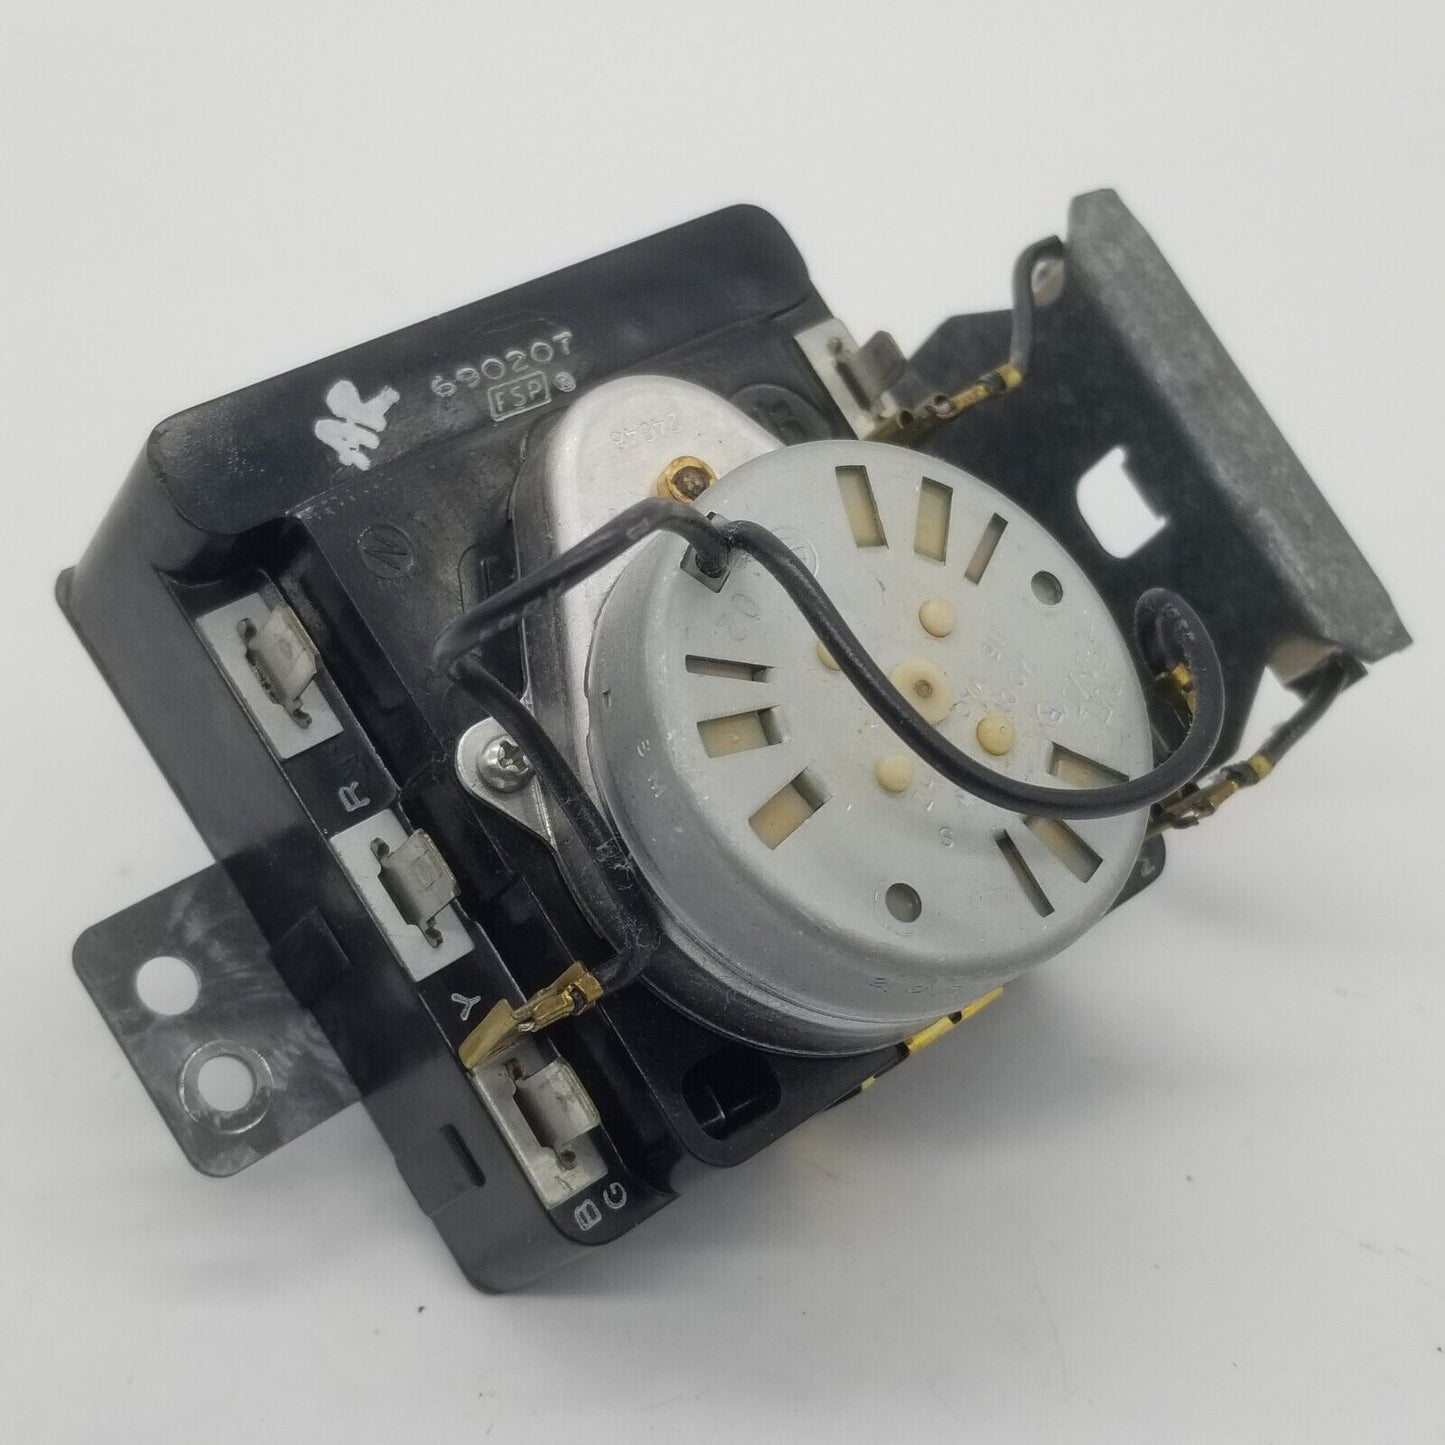 Genuine OEM Replacement for Whirlpool Dryer Timer 690207